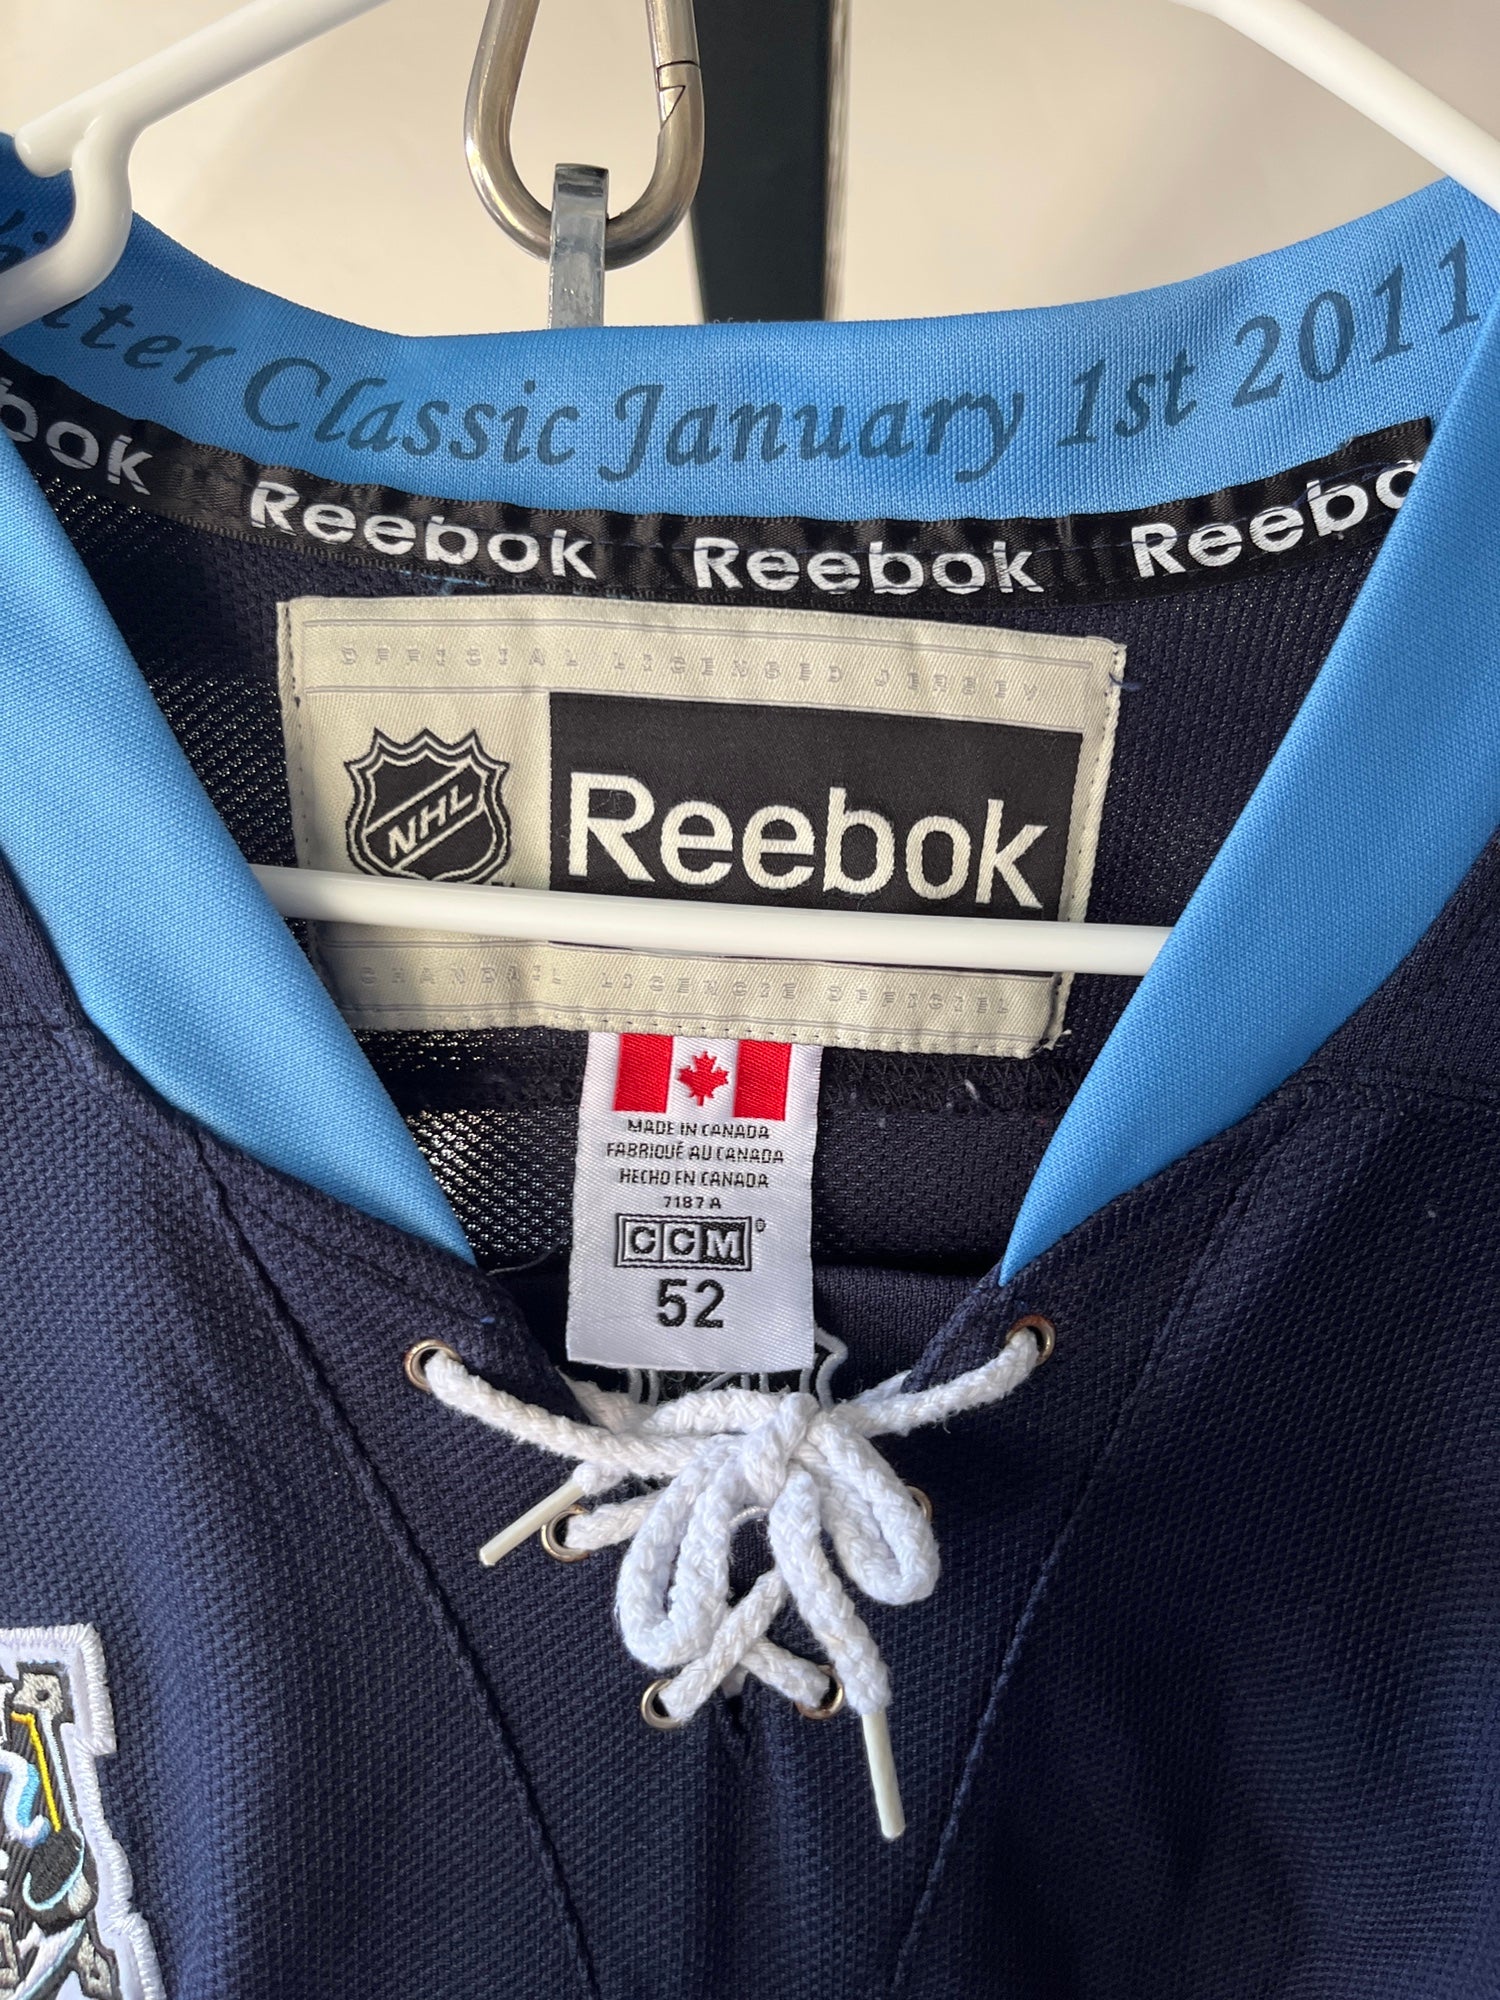 Sidney Crosby Pittsburgh Penguins Winter Classic Jersey CCM Reebok Size 52